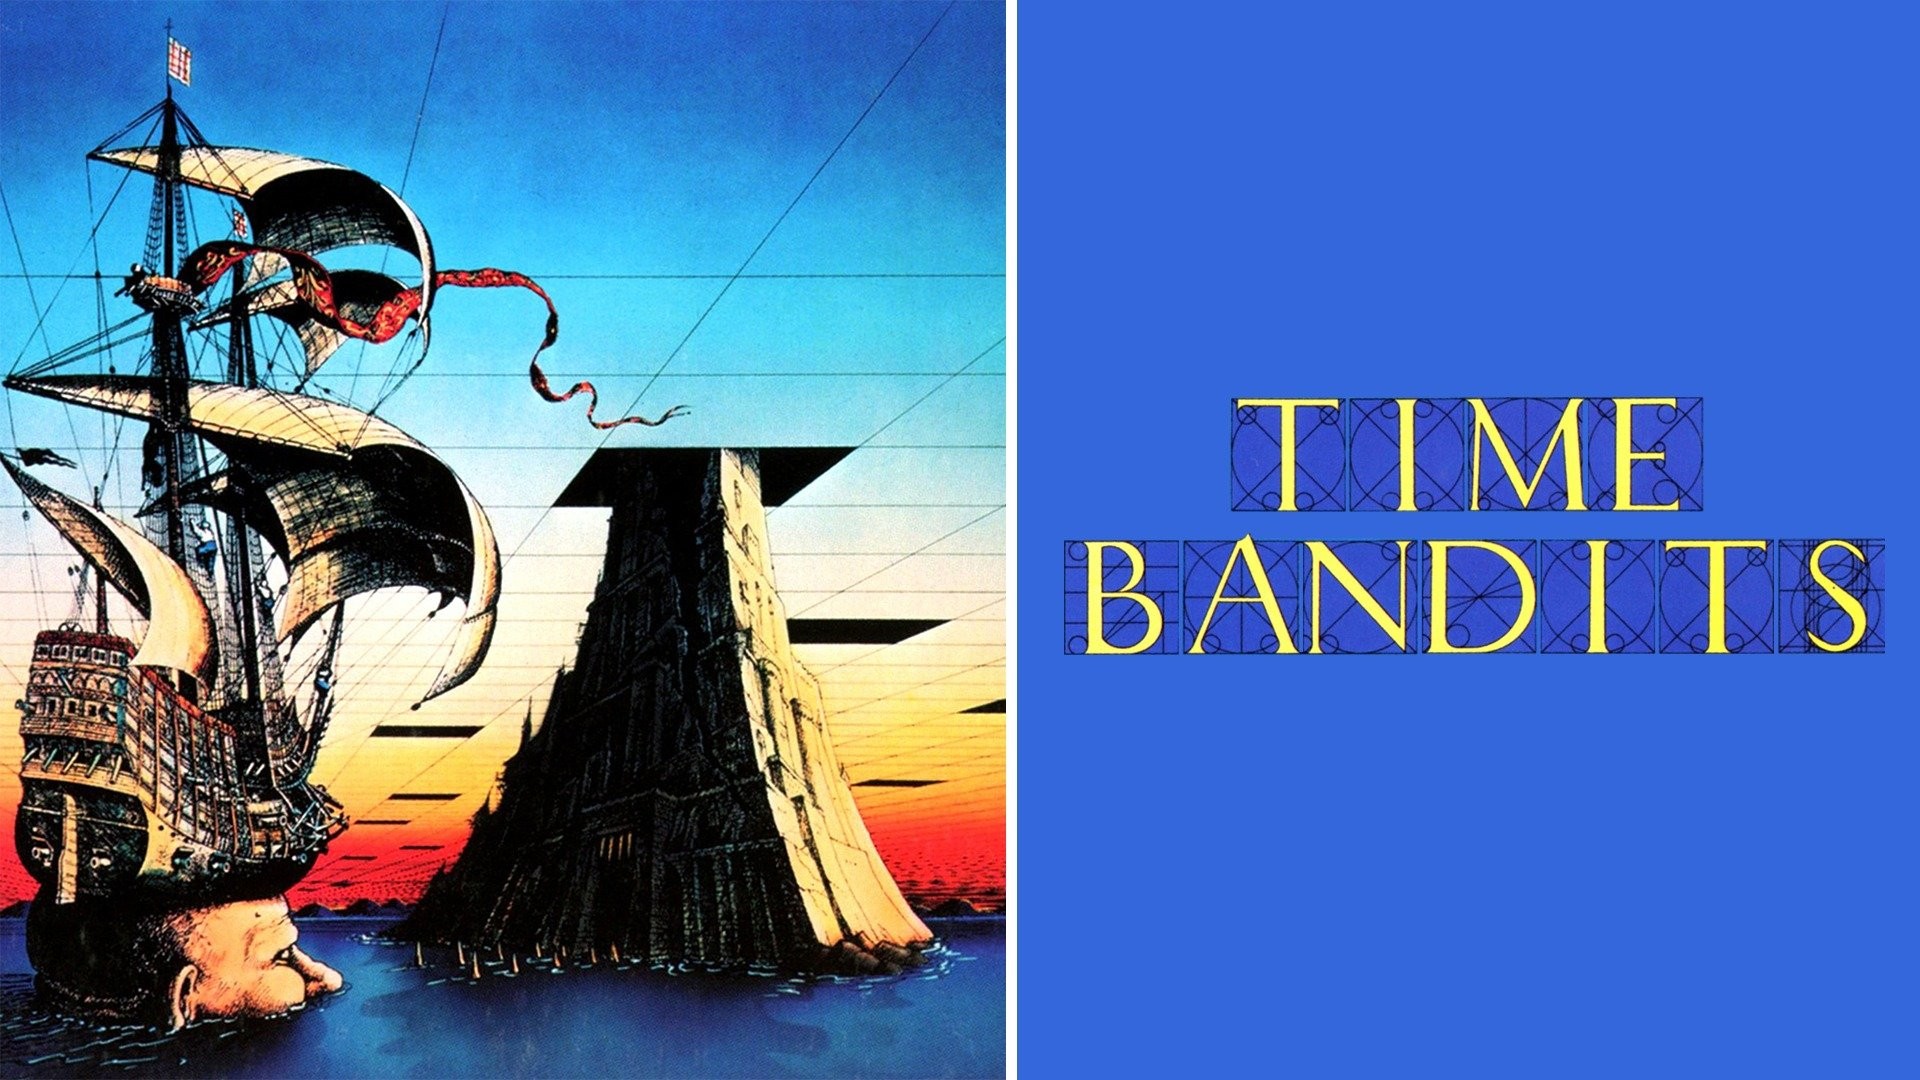 10+ Years Later: Is TIME BANDITS Still One for the Ages?